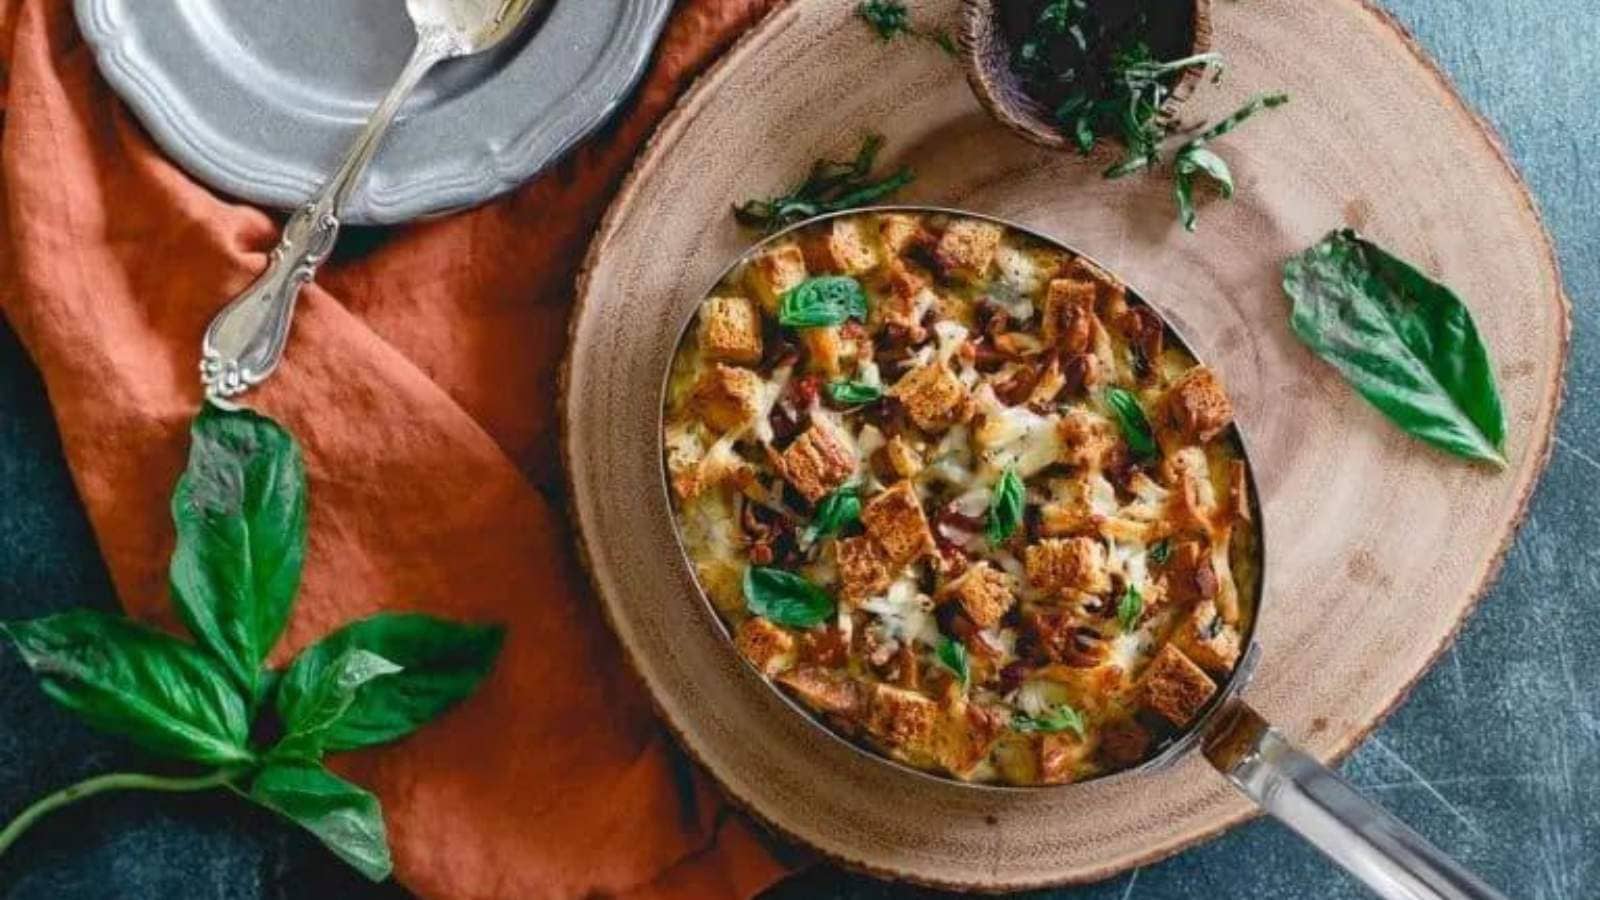 Everything Bagel Breakfast Strata recipe by Running To The Kitchen.